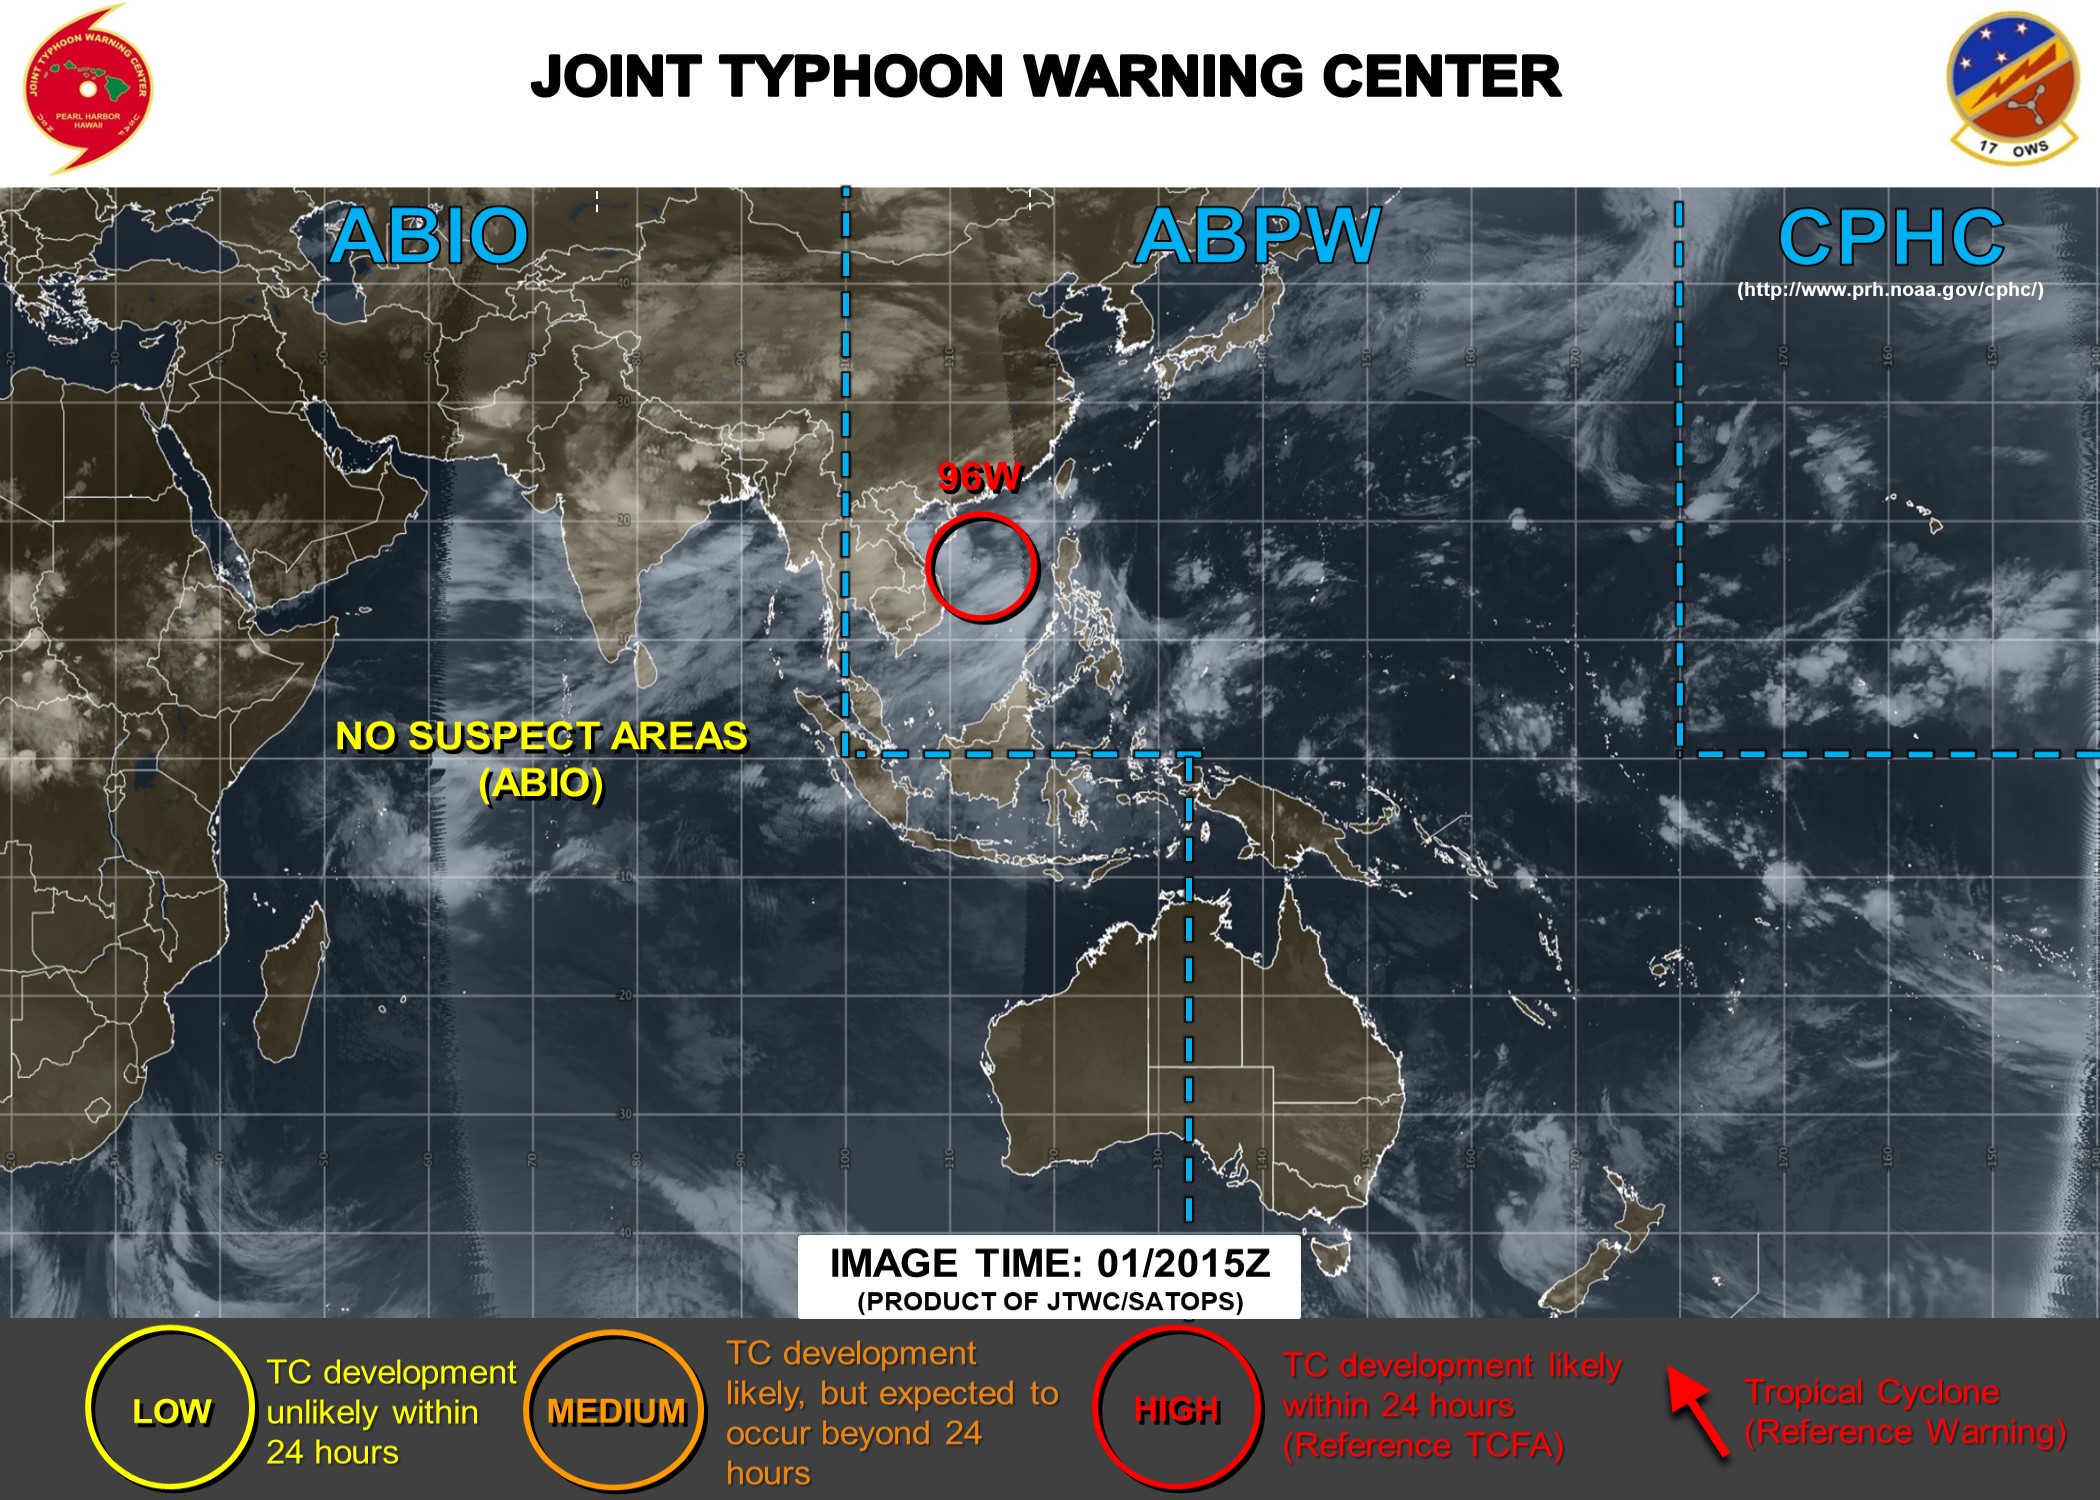 South China Sea: INVEST 96W is now upgraded to HIGH